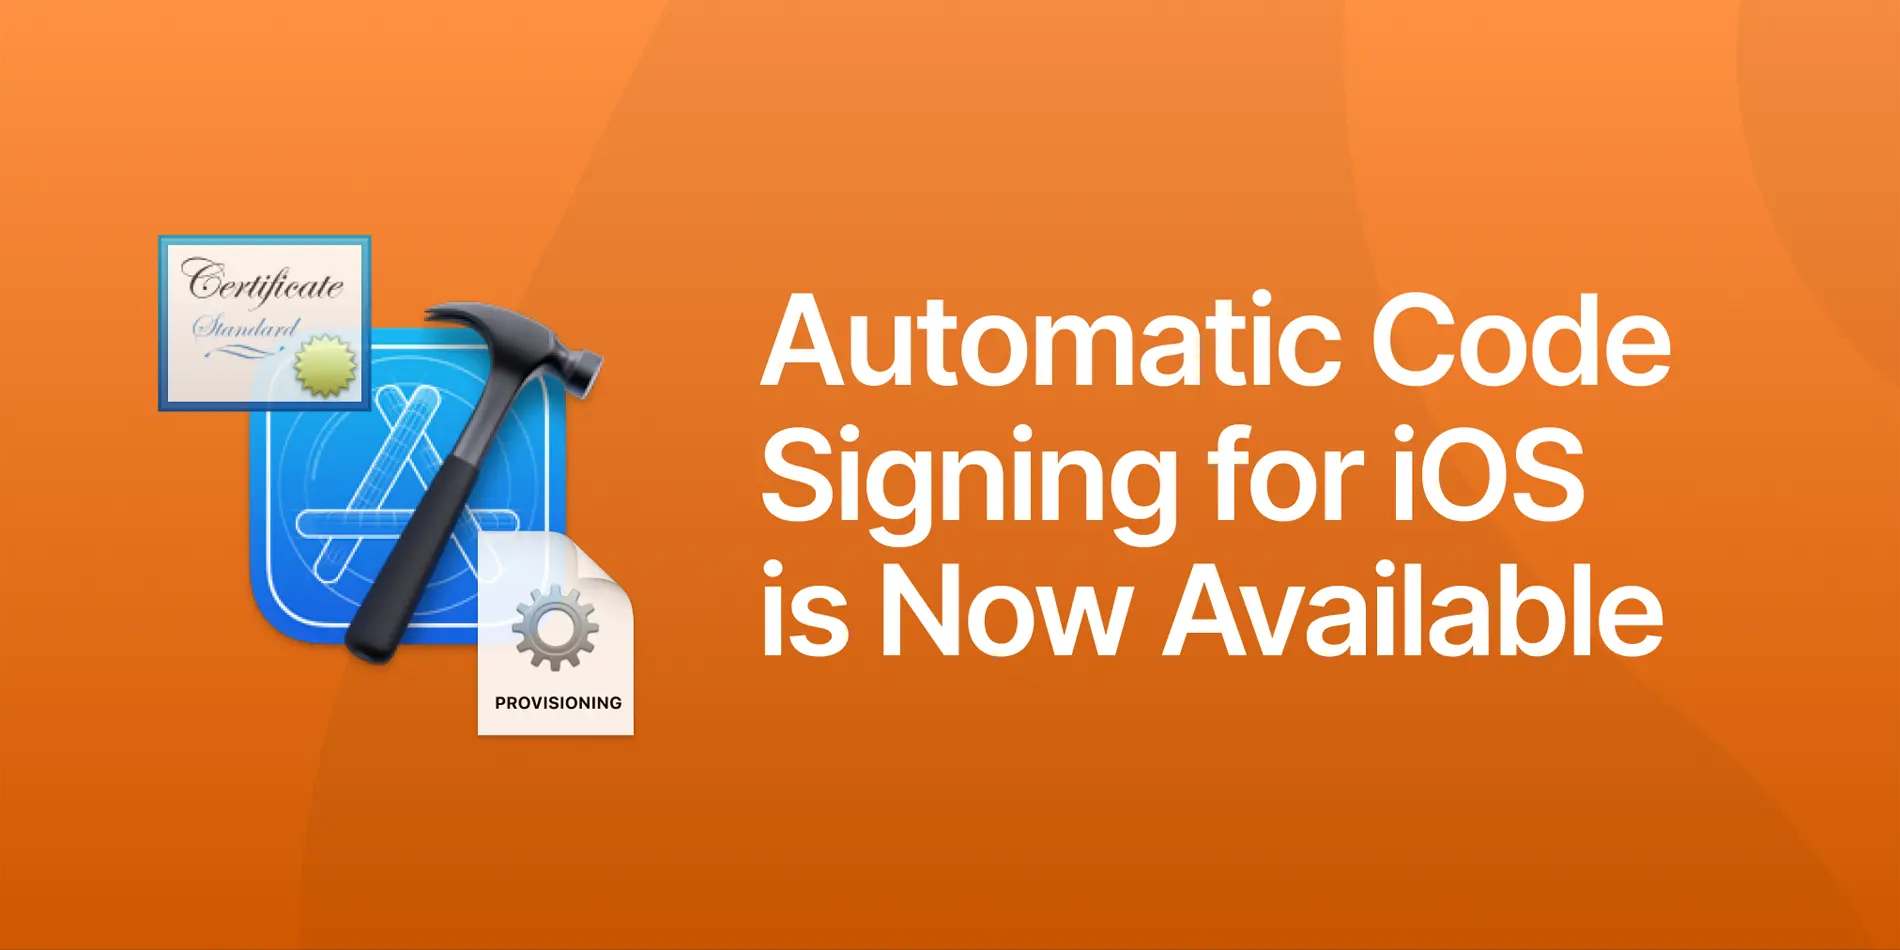 Automatic Code Signing for iOS in Now Available